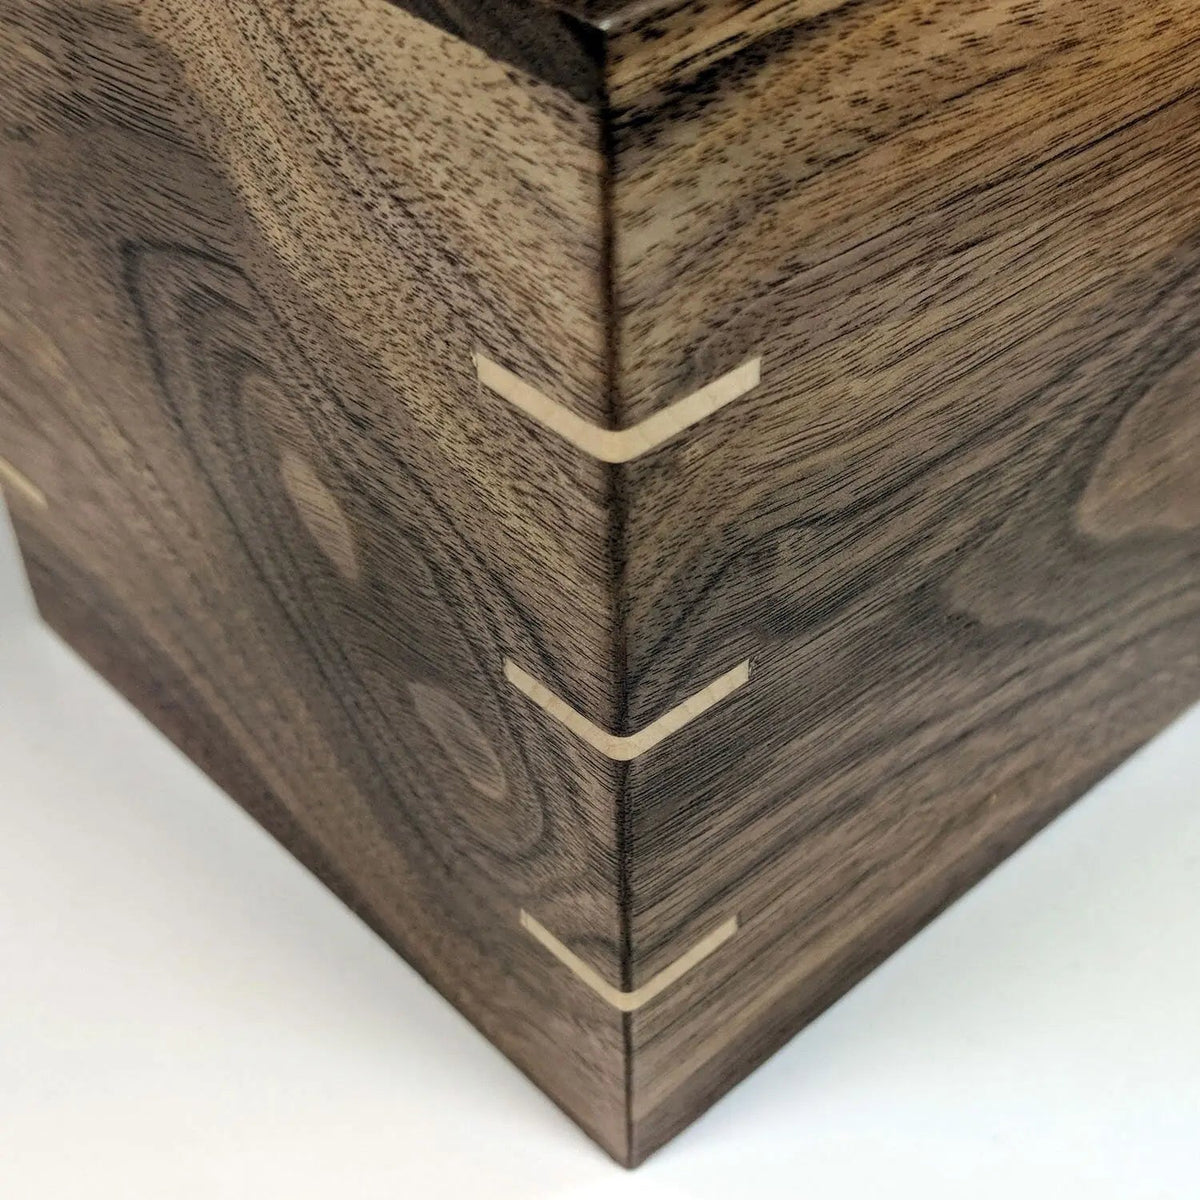 Solid Texas Black Walnut With Maple Spines On Wooden